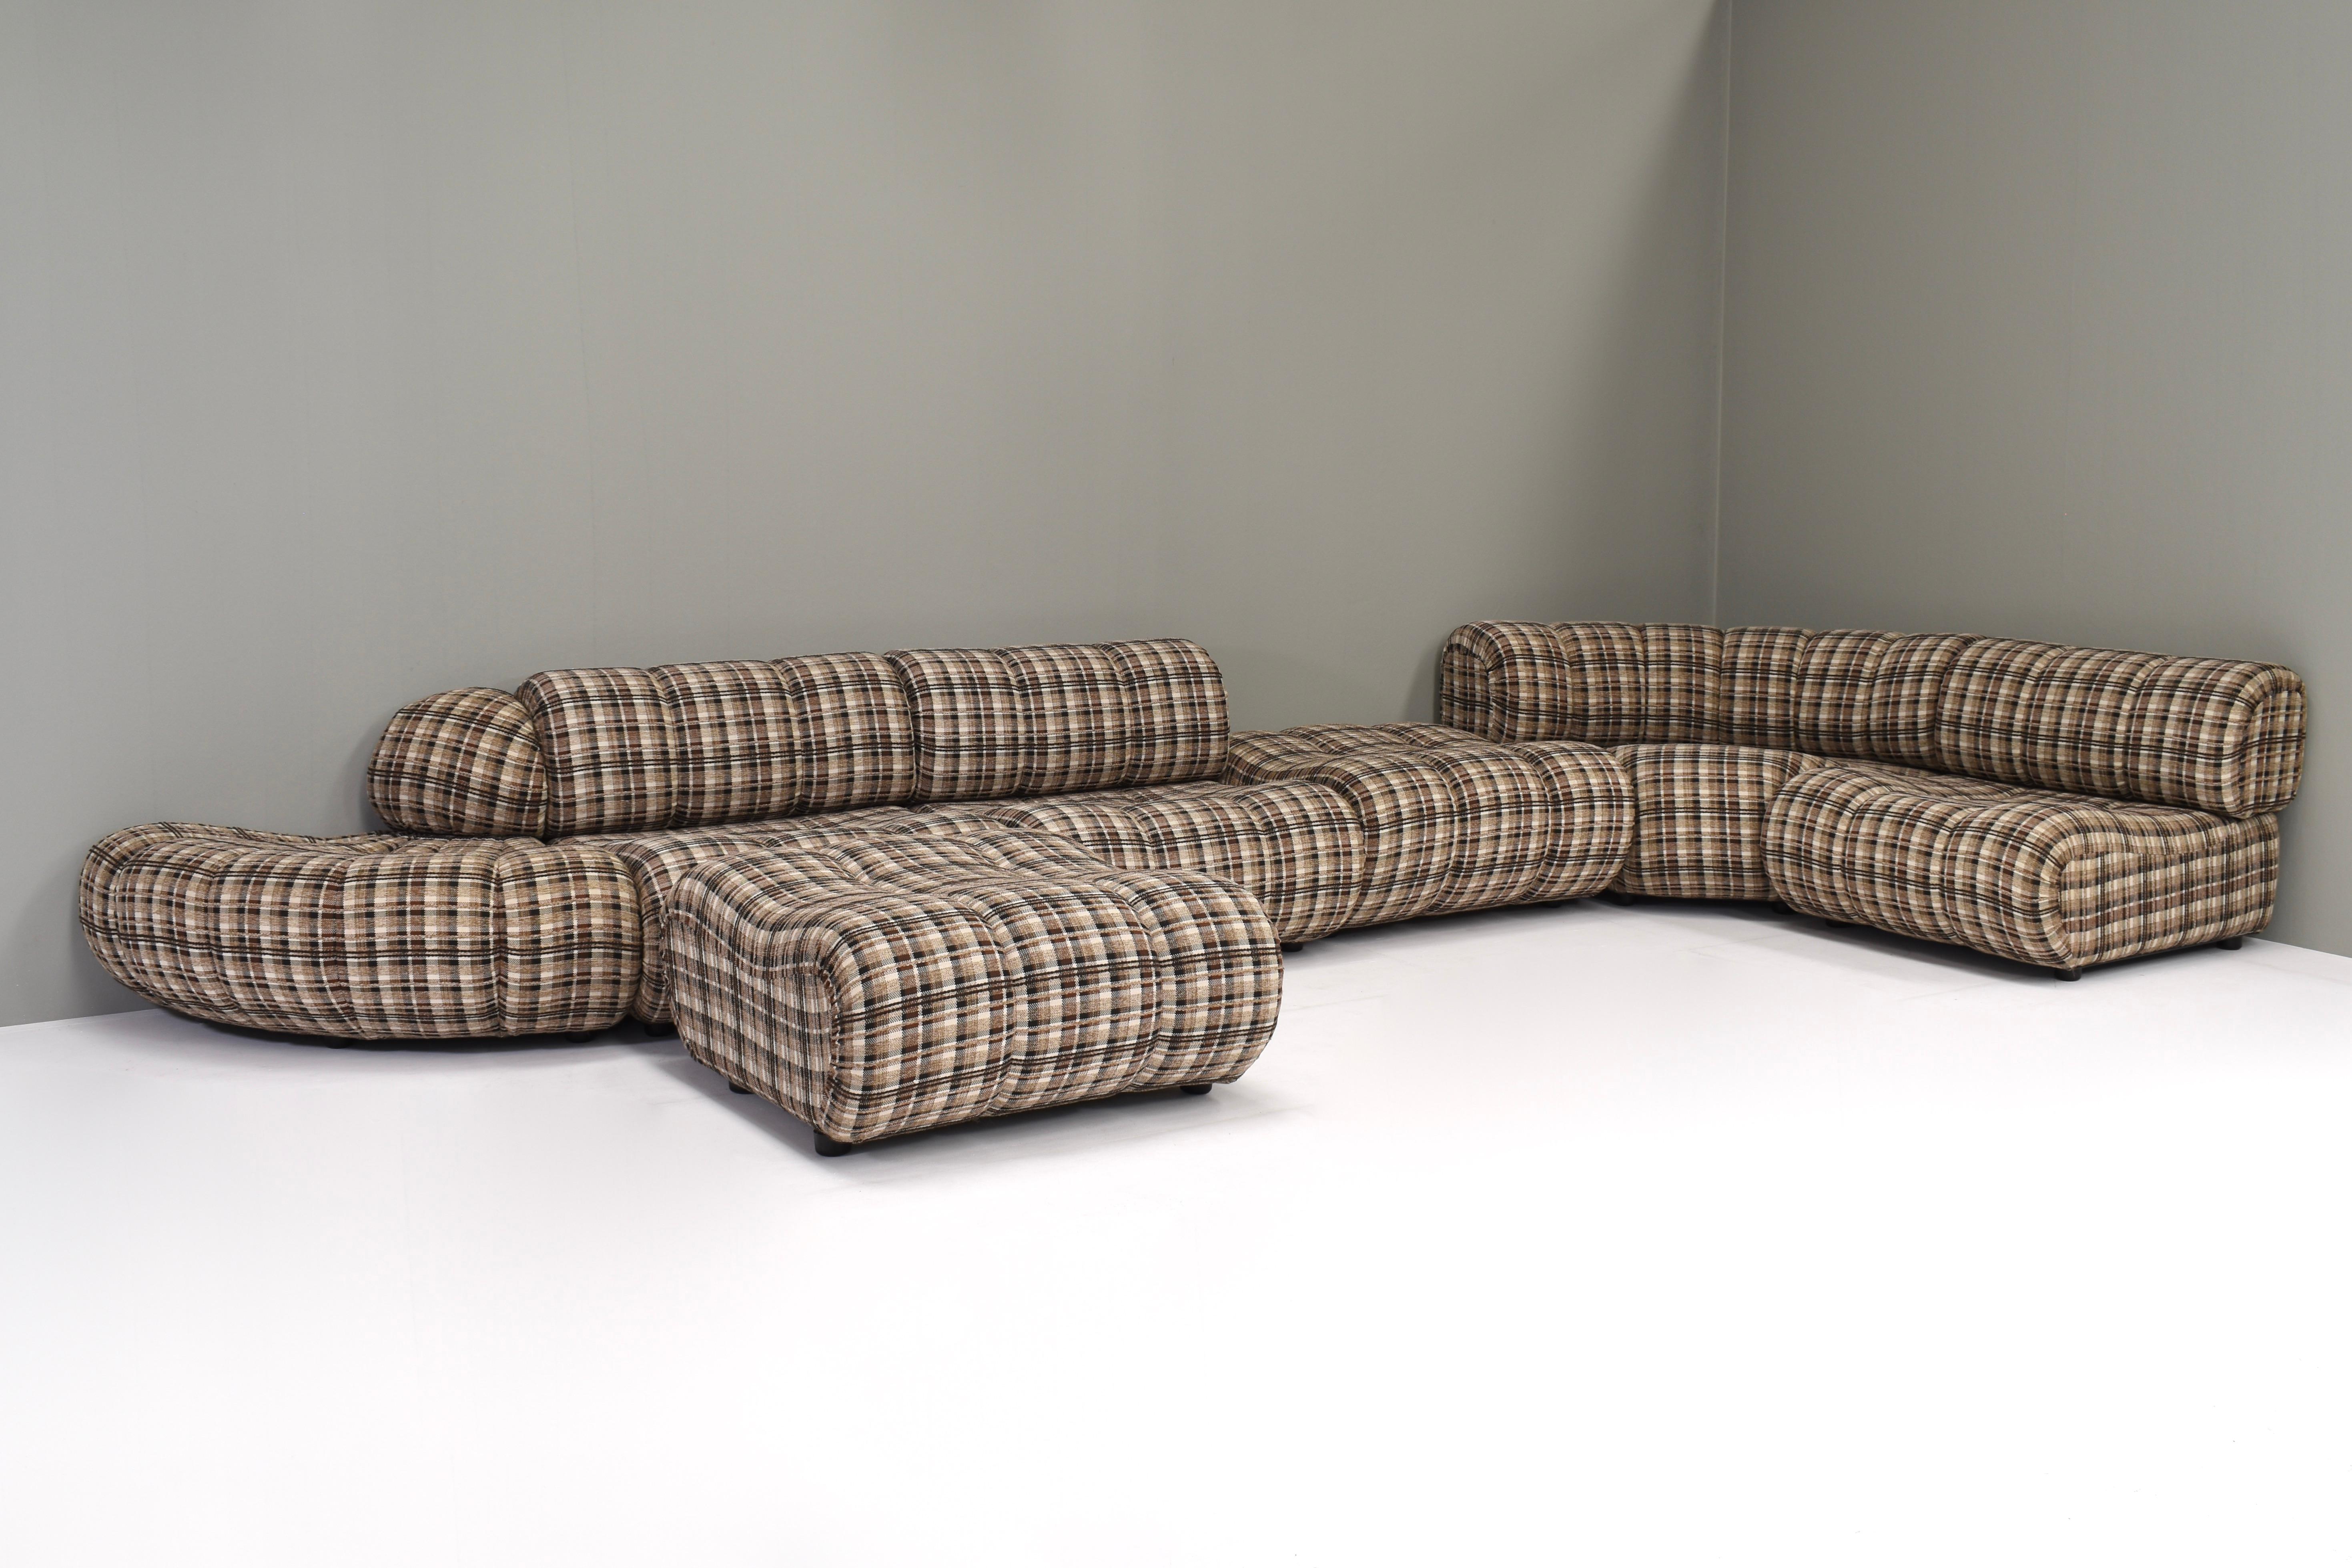 Rare sectional sofa by Giuseppe Munari for Poltrona Munari, Italy circa 1970.
This sofa features 7 elements that can be arranged to in different set-ups to your own liking.
The fabric is still original and is made of a linen / wool mix.
The